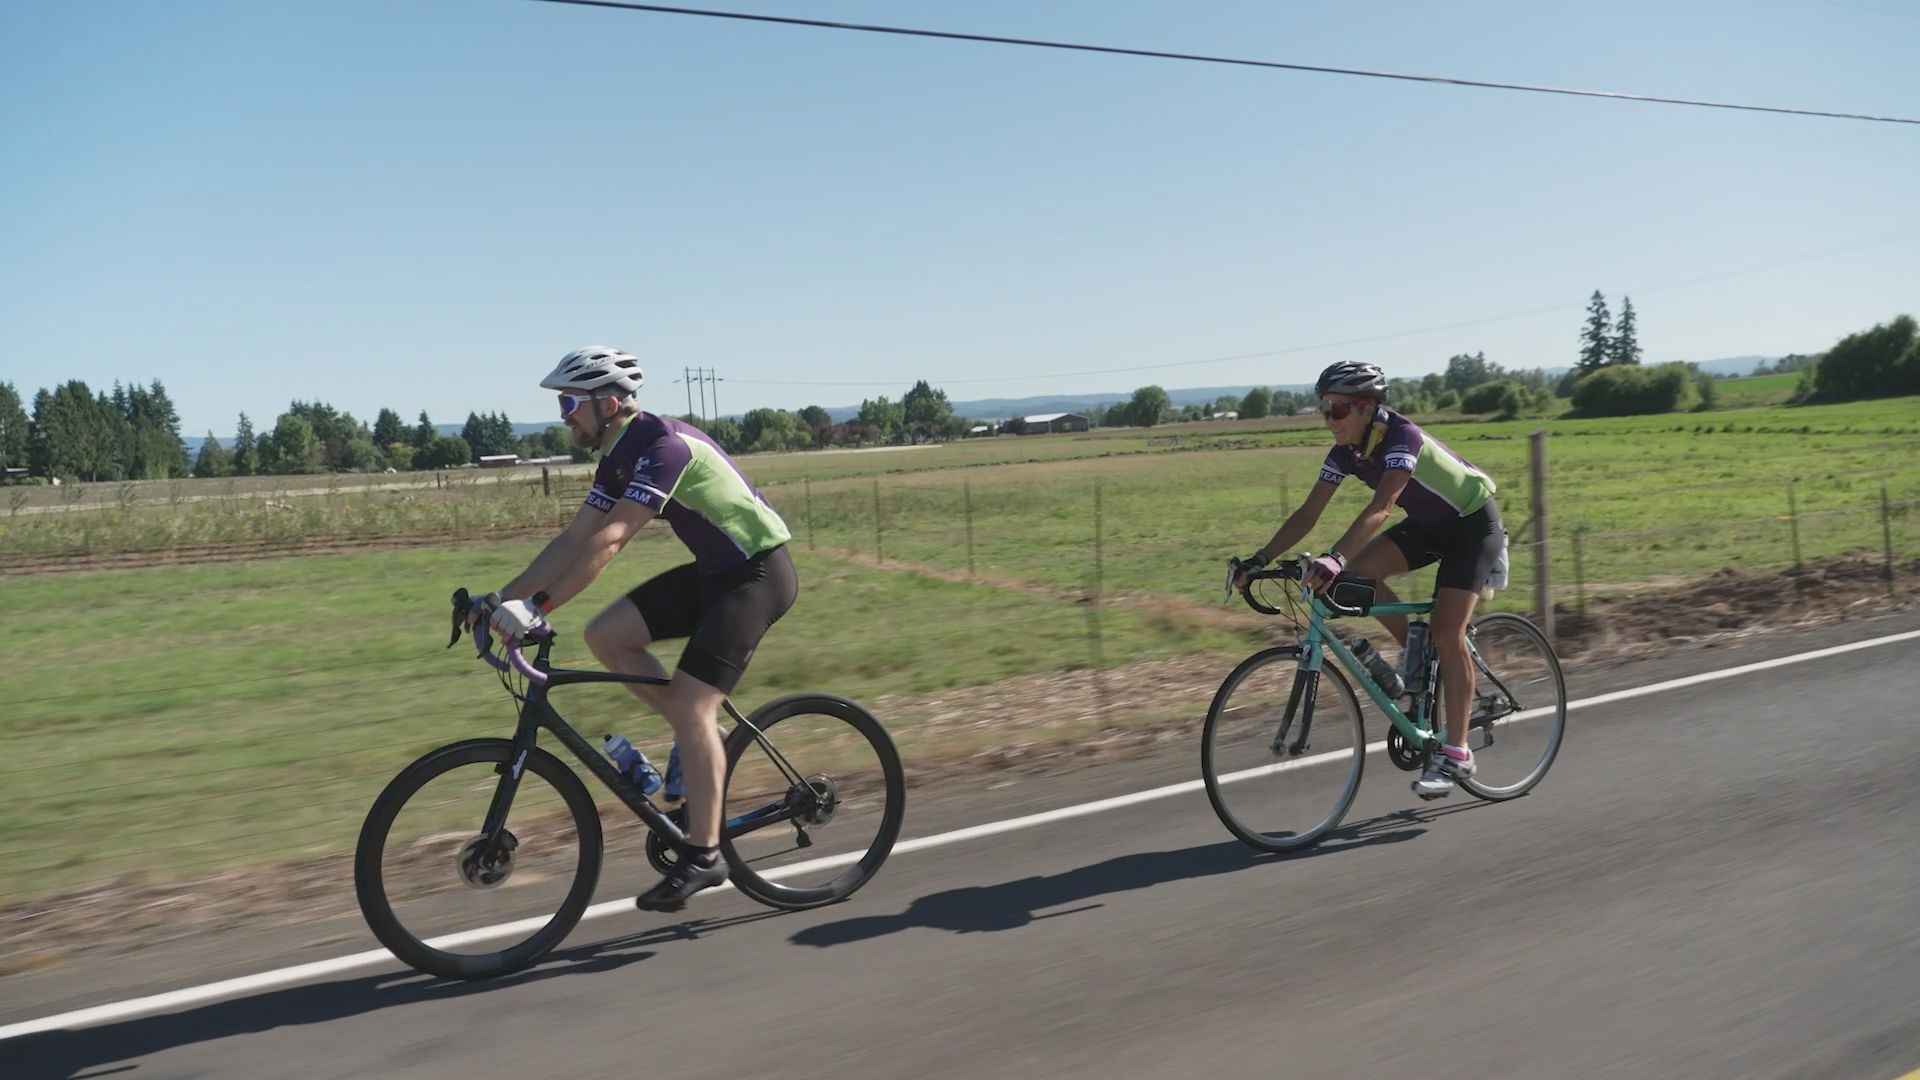 A cycling team is setting out on a ride across the country in honor of a teammate who recently died of cancer. Grant McOmie gives us a look at their journey.